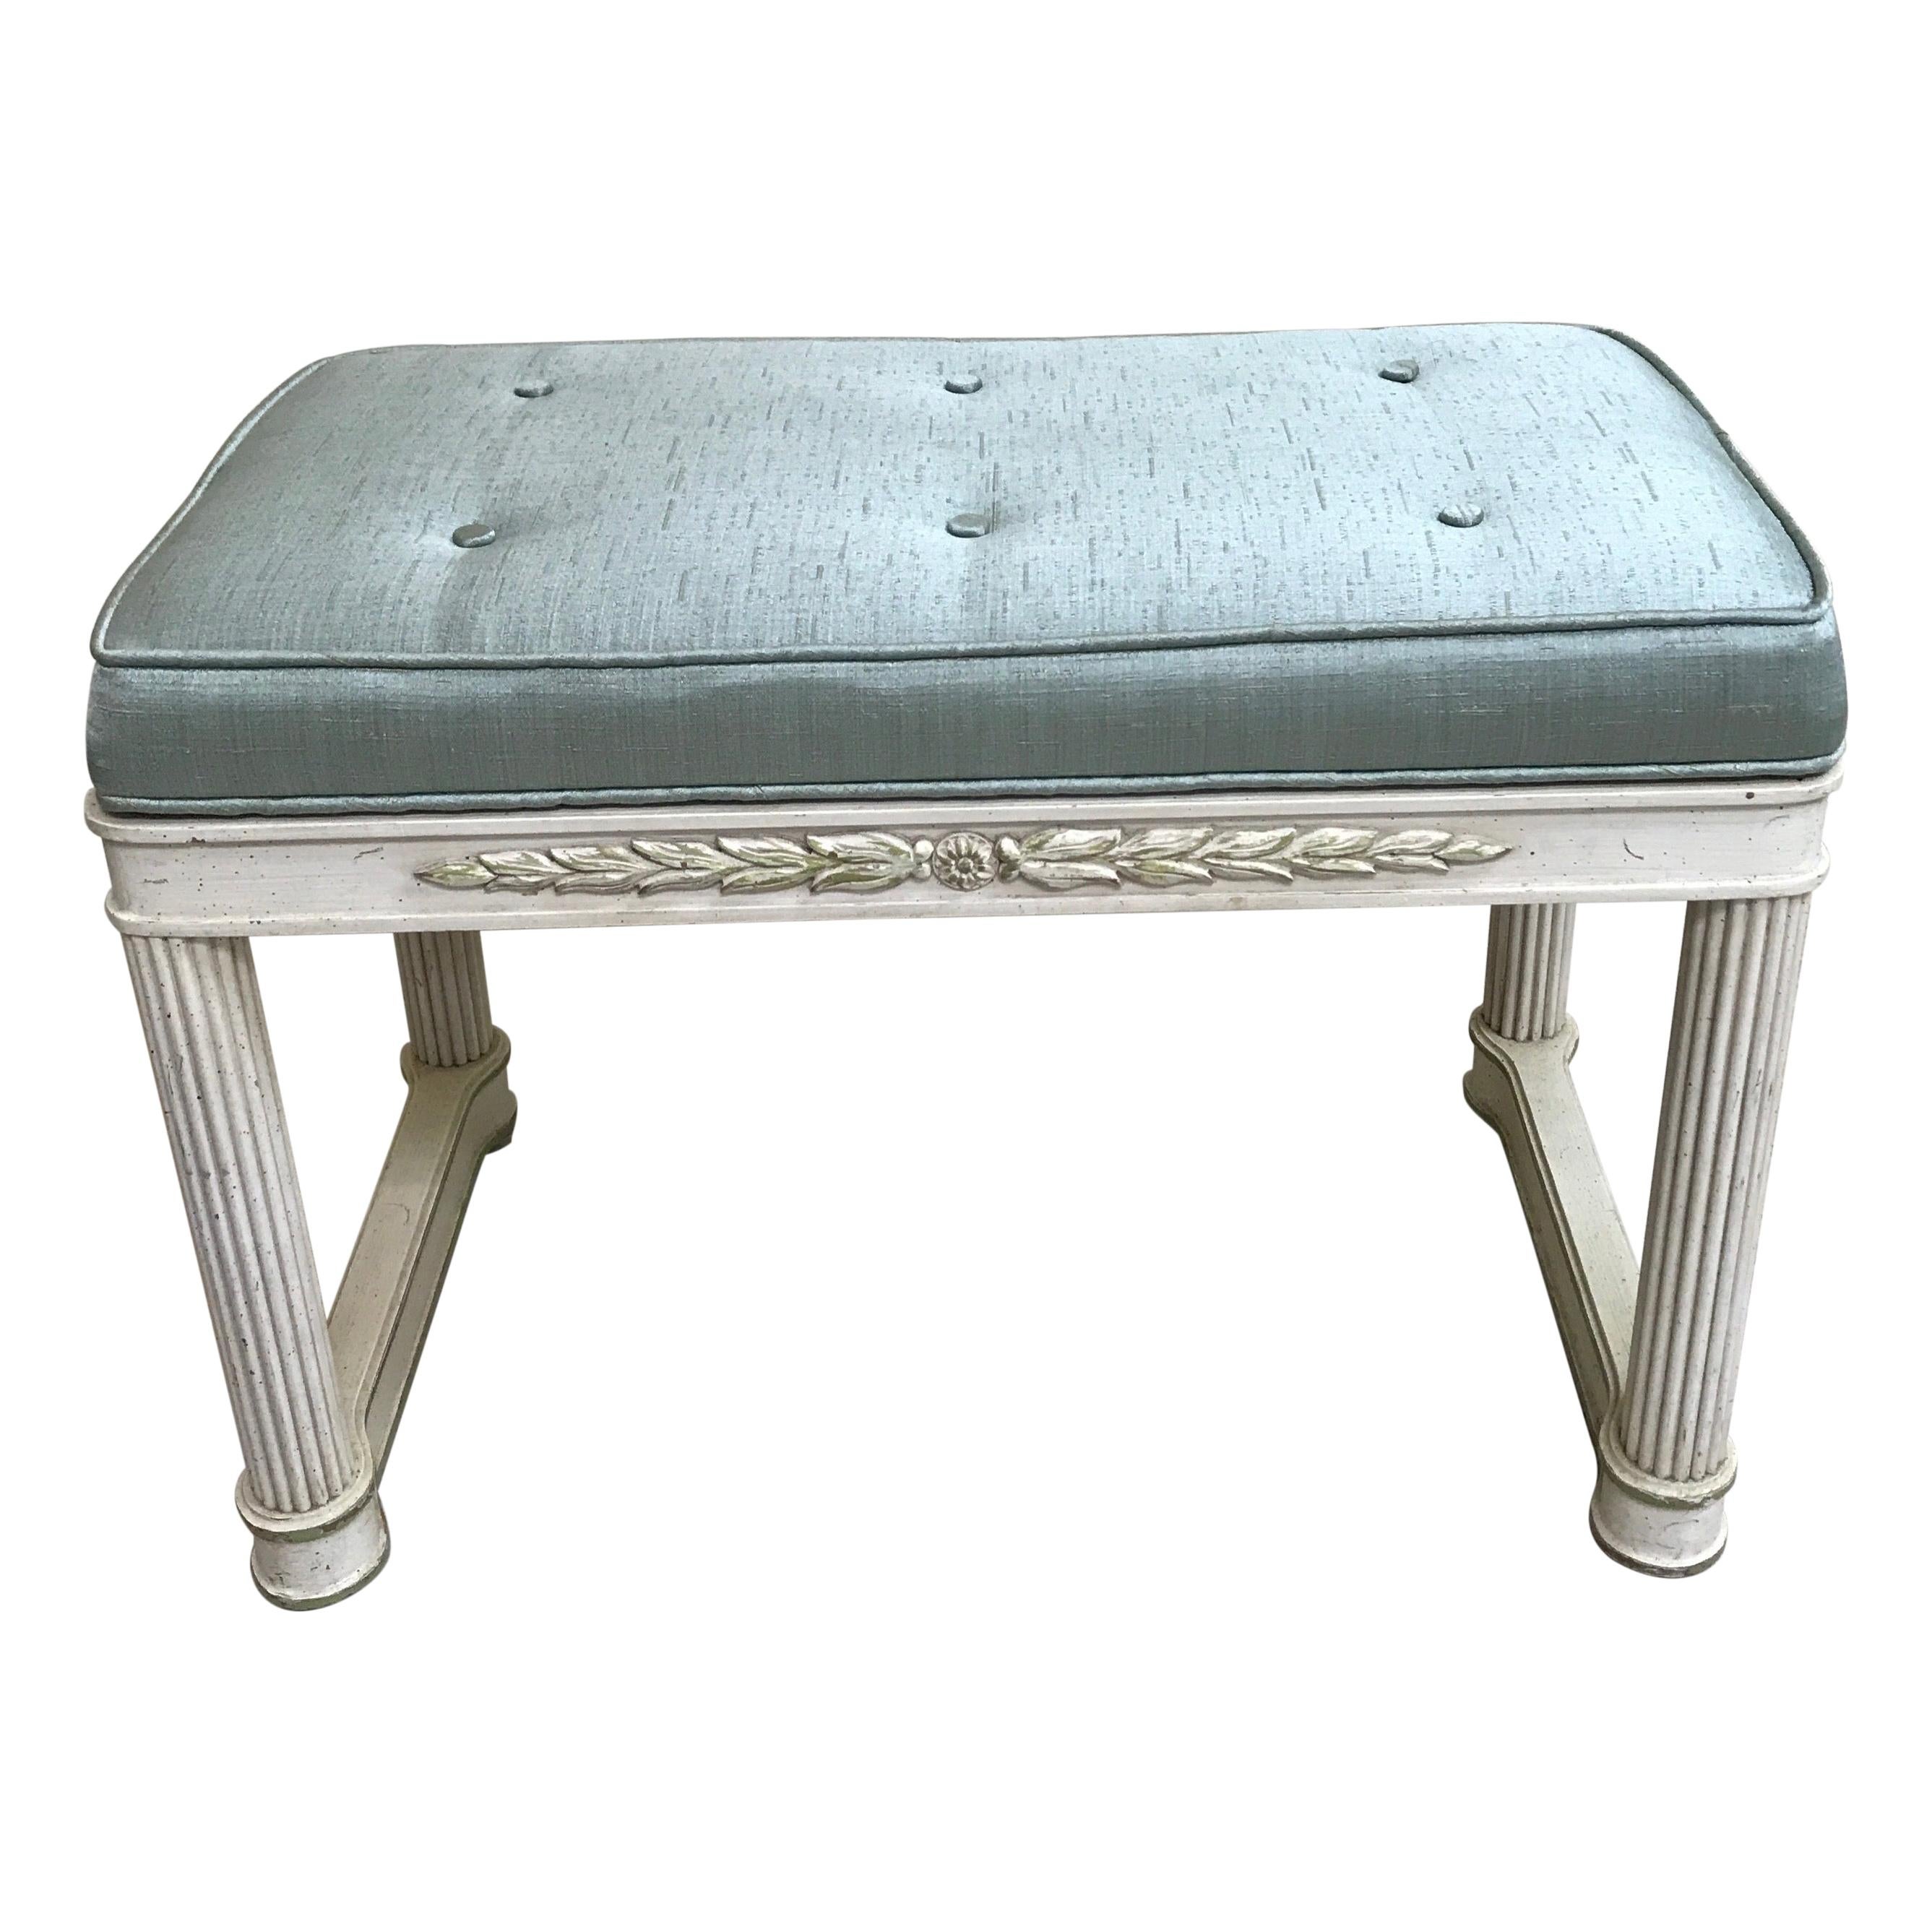 Neoclassical Painted Italian Bench by Palladio